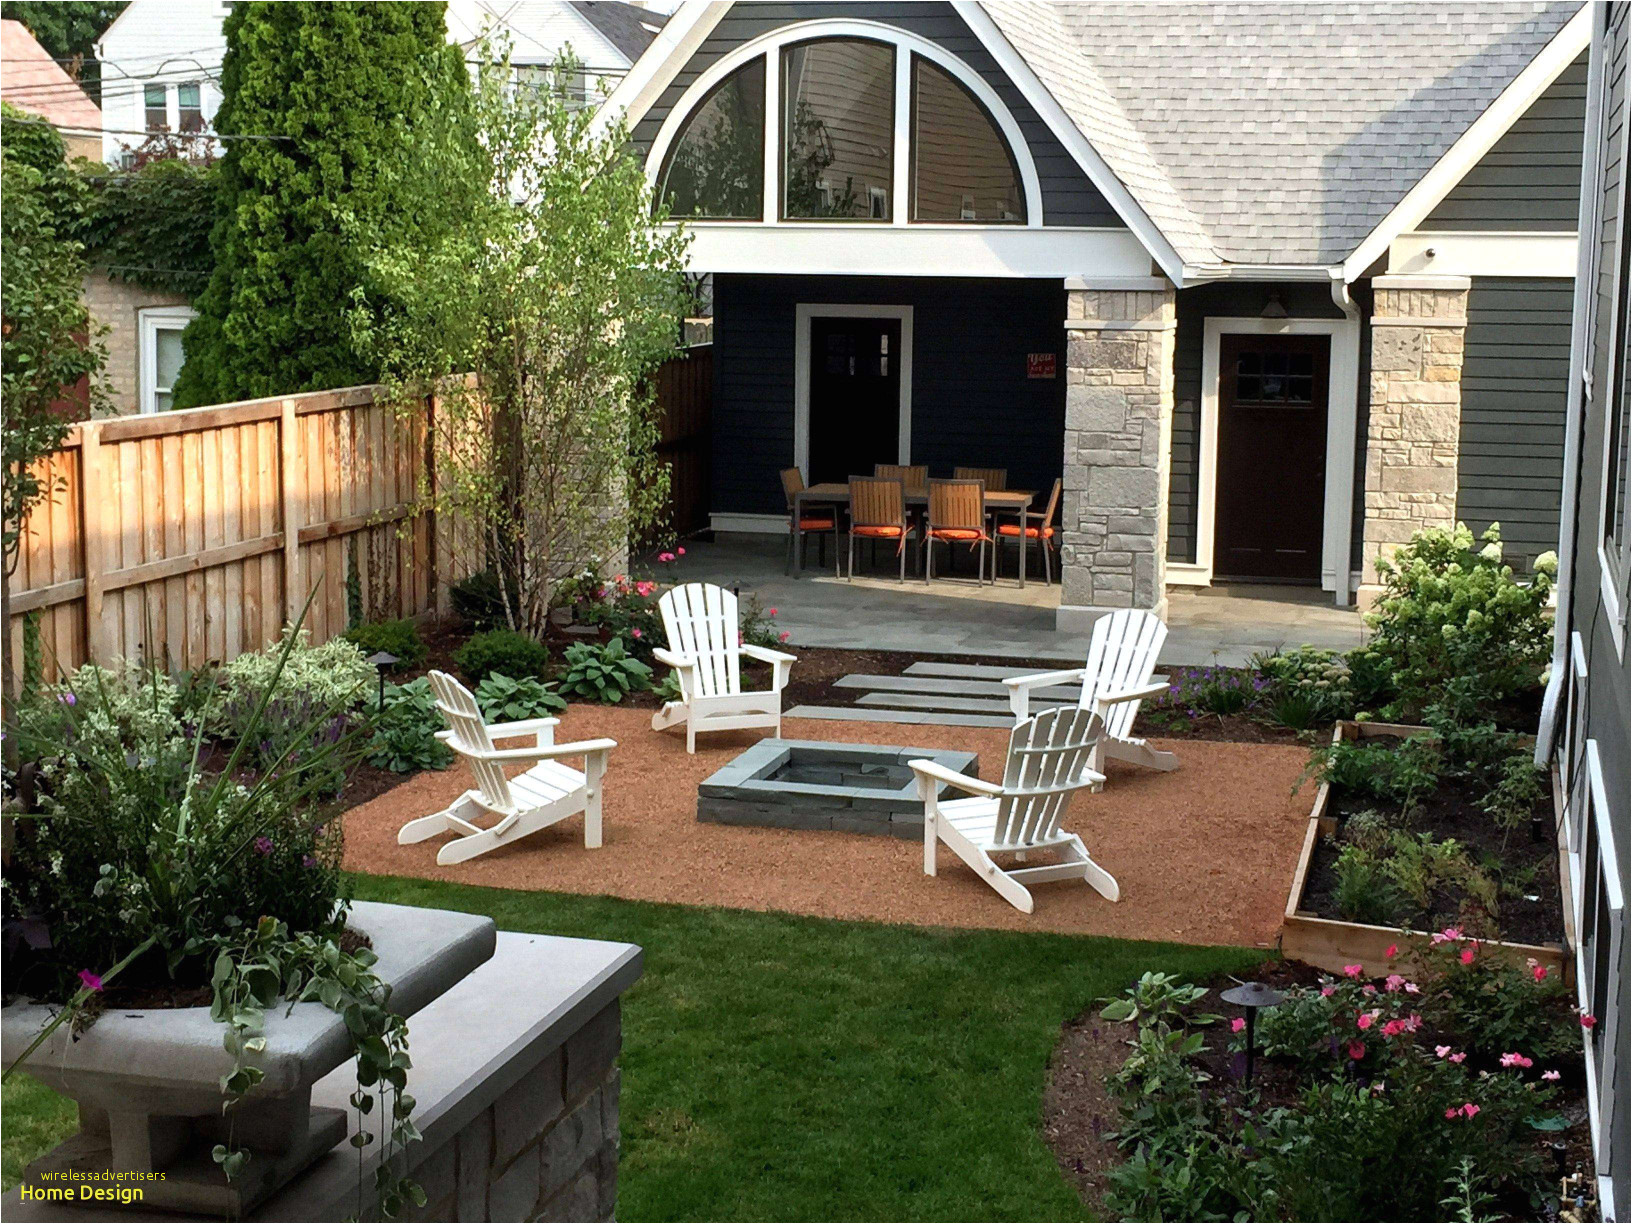 patio pavers lovely raised paver patio fresh patio paver 0d ideas from backyard landscape design with